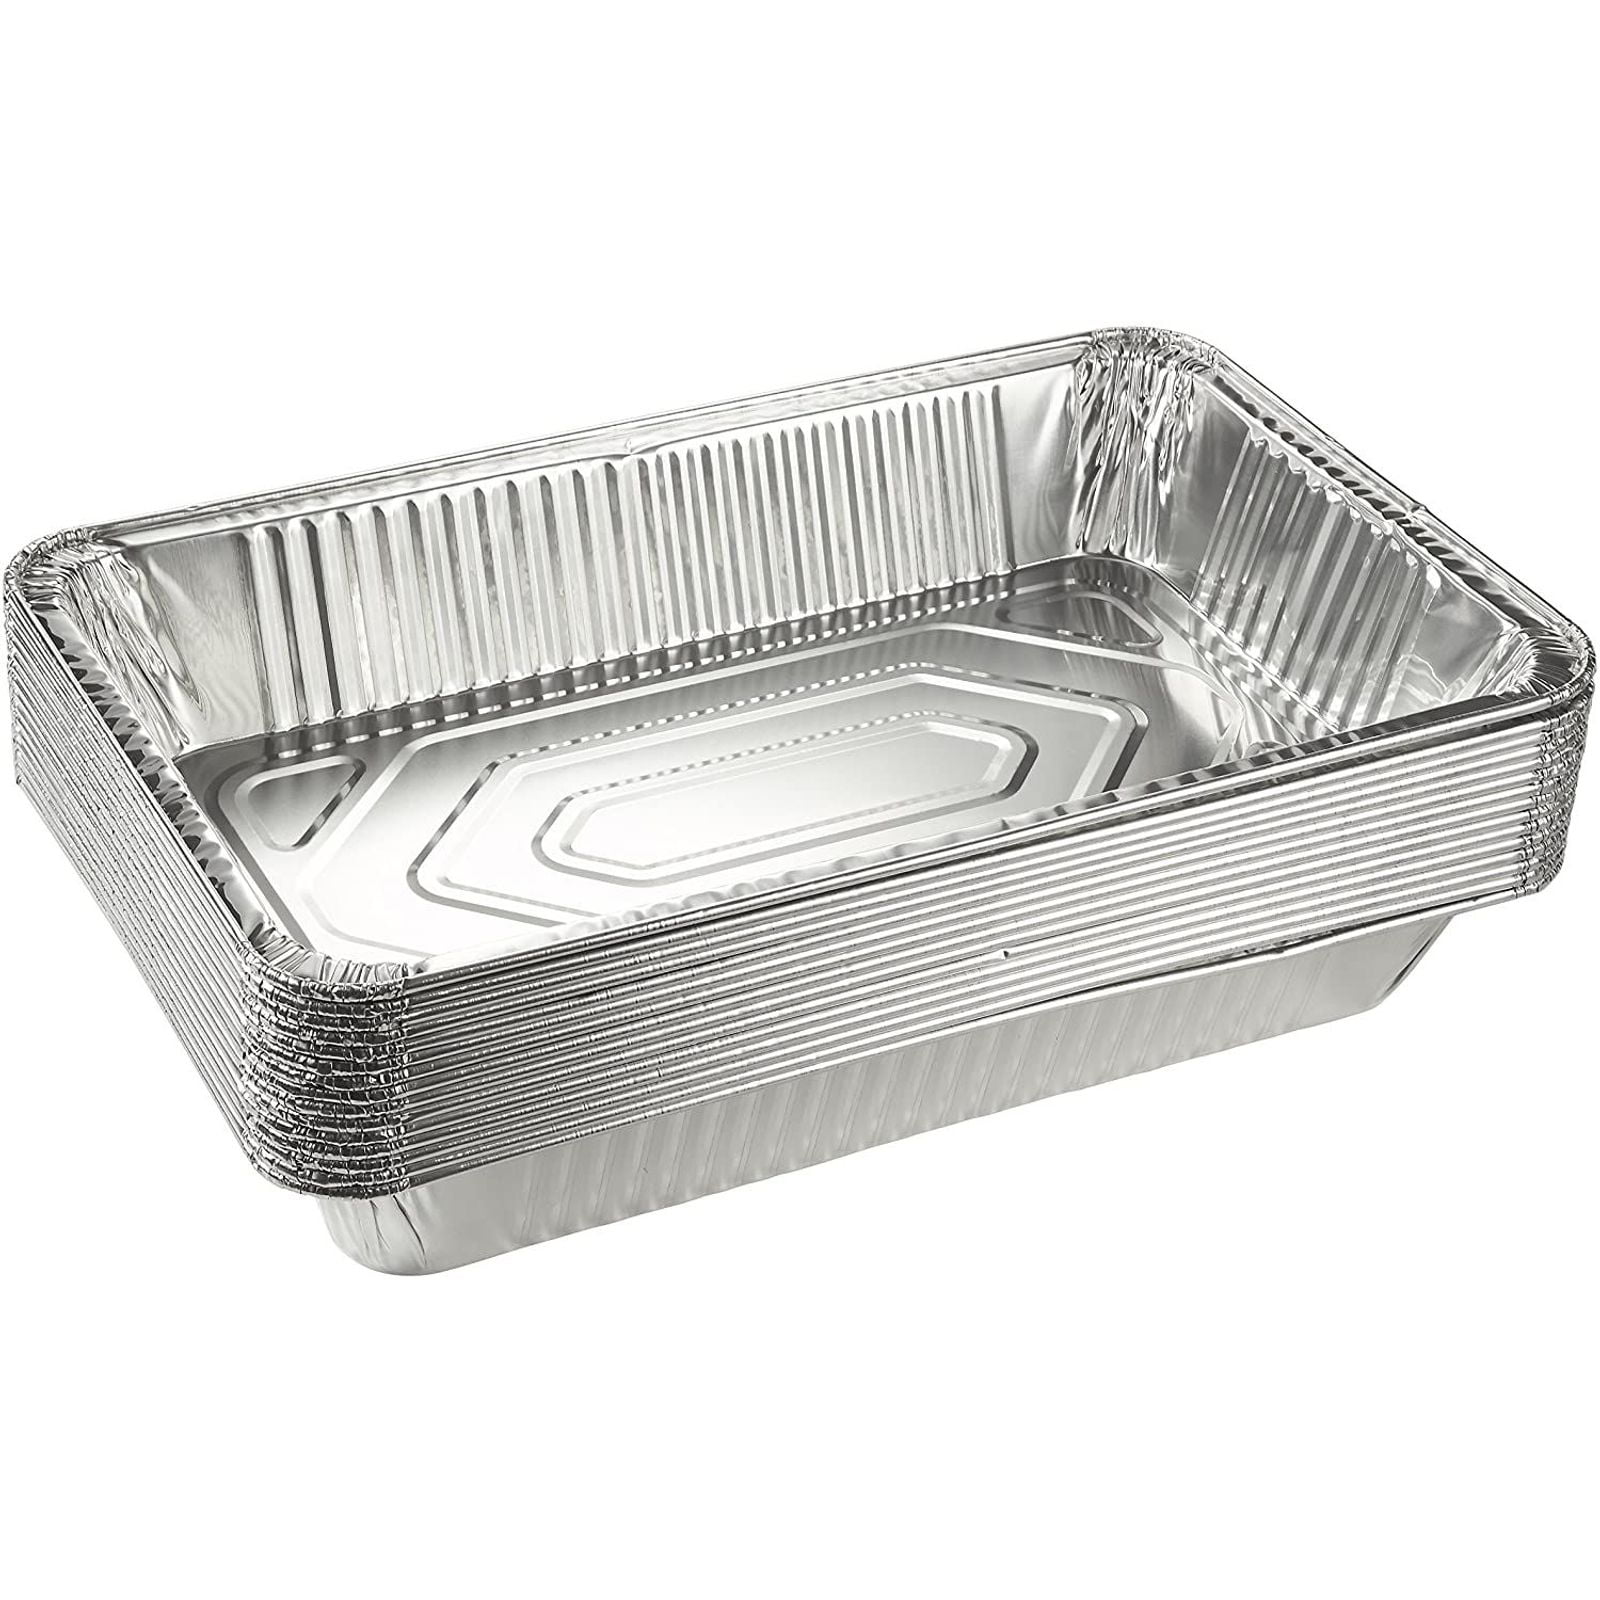 Aluminum Foil Pans 15 Pieces Full-Size Deep Disposable Steam Table Pans for  Baking, Roasting, Broiling, Cooking, 20.5 x 3.3 x 13 inches